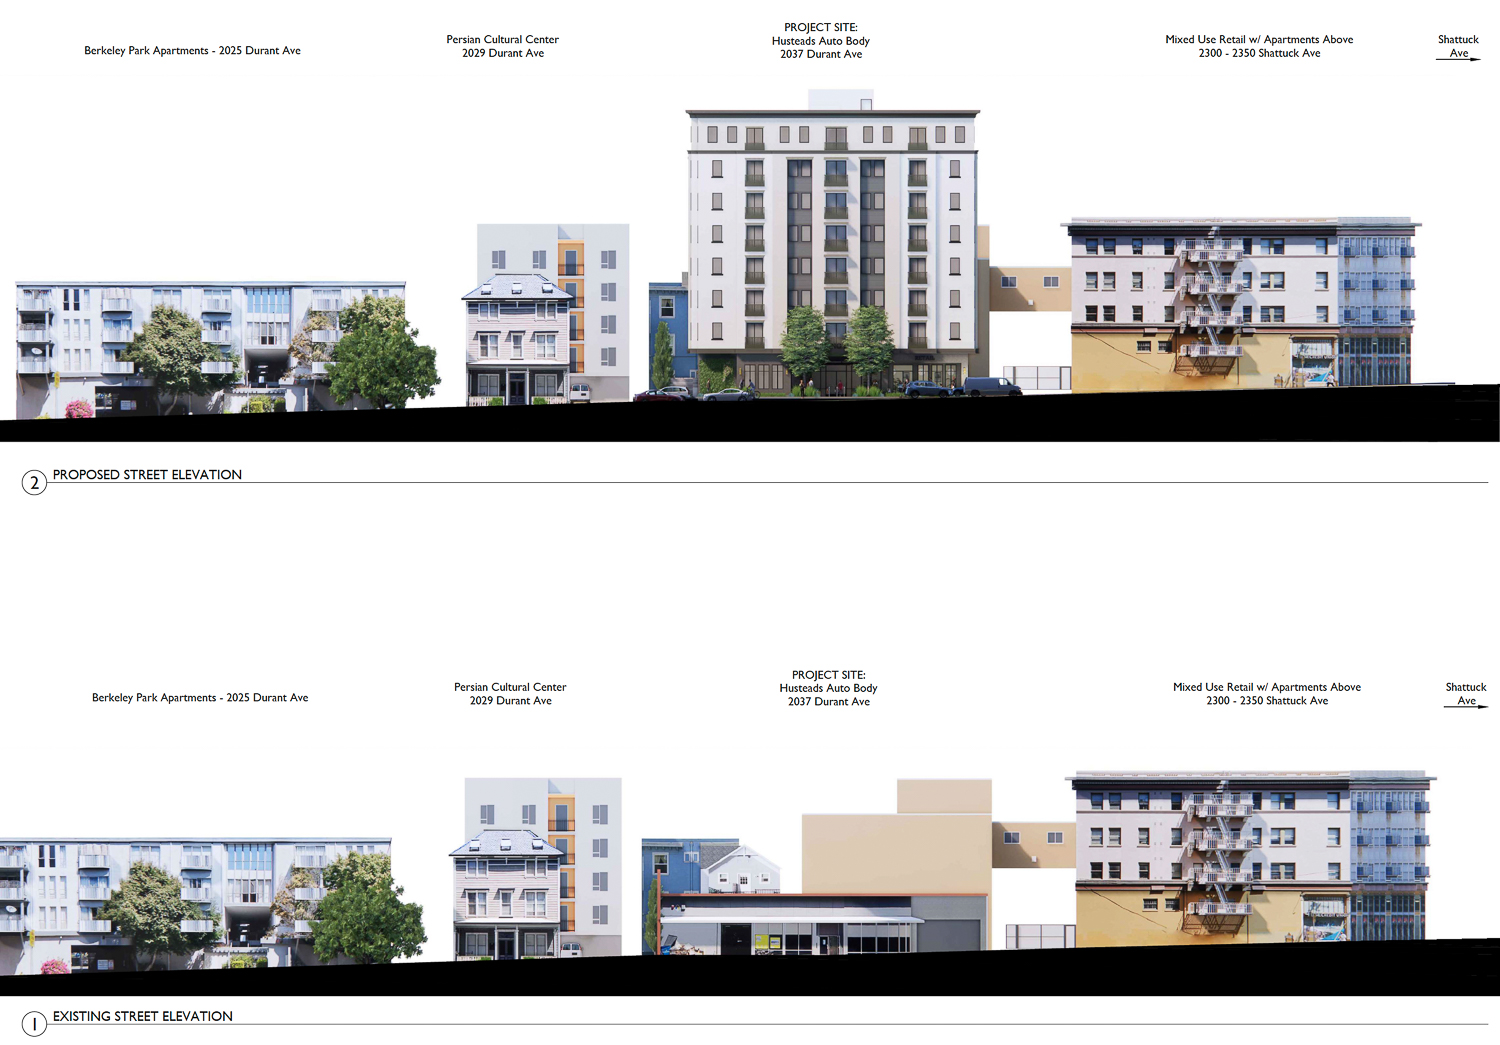 2037 Durant Avenue elevations existing condition (below) and proposed condition (above), illustration by Studio KDA